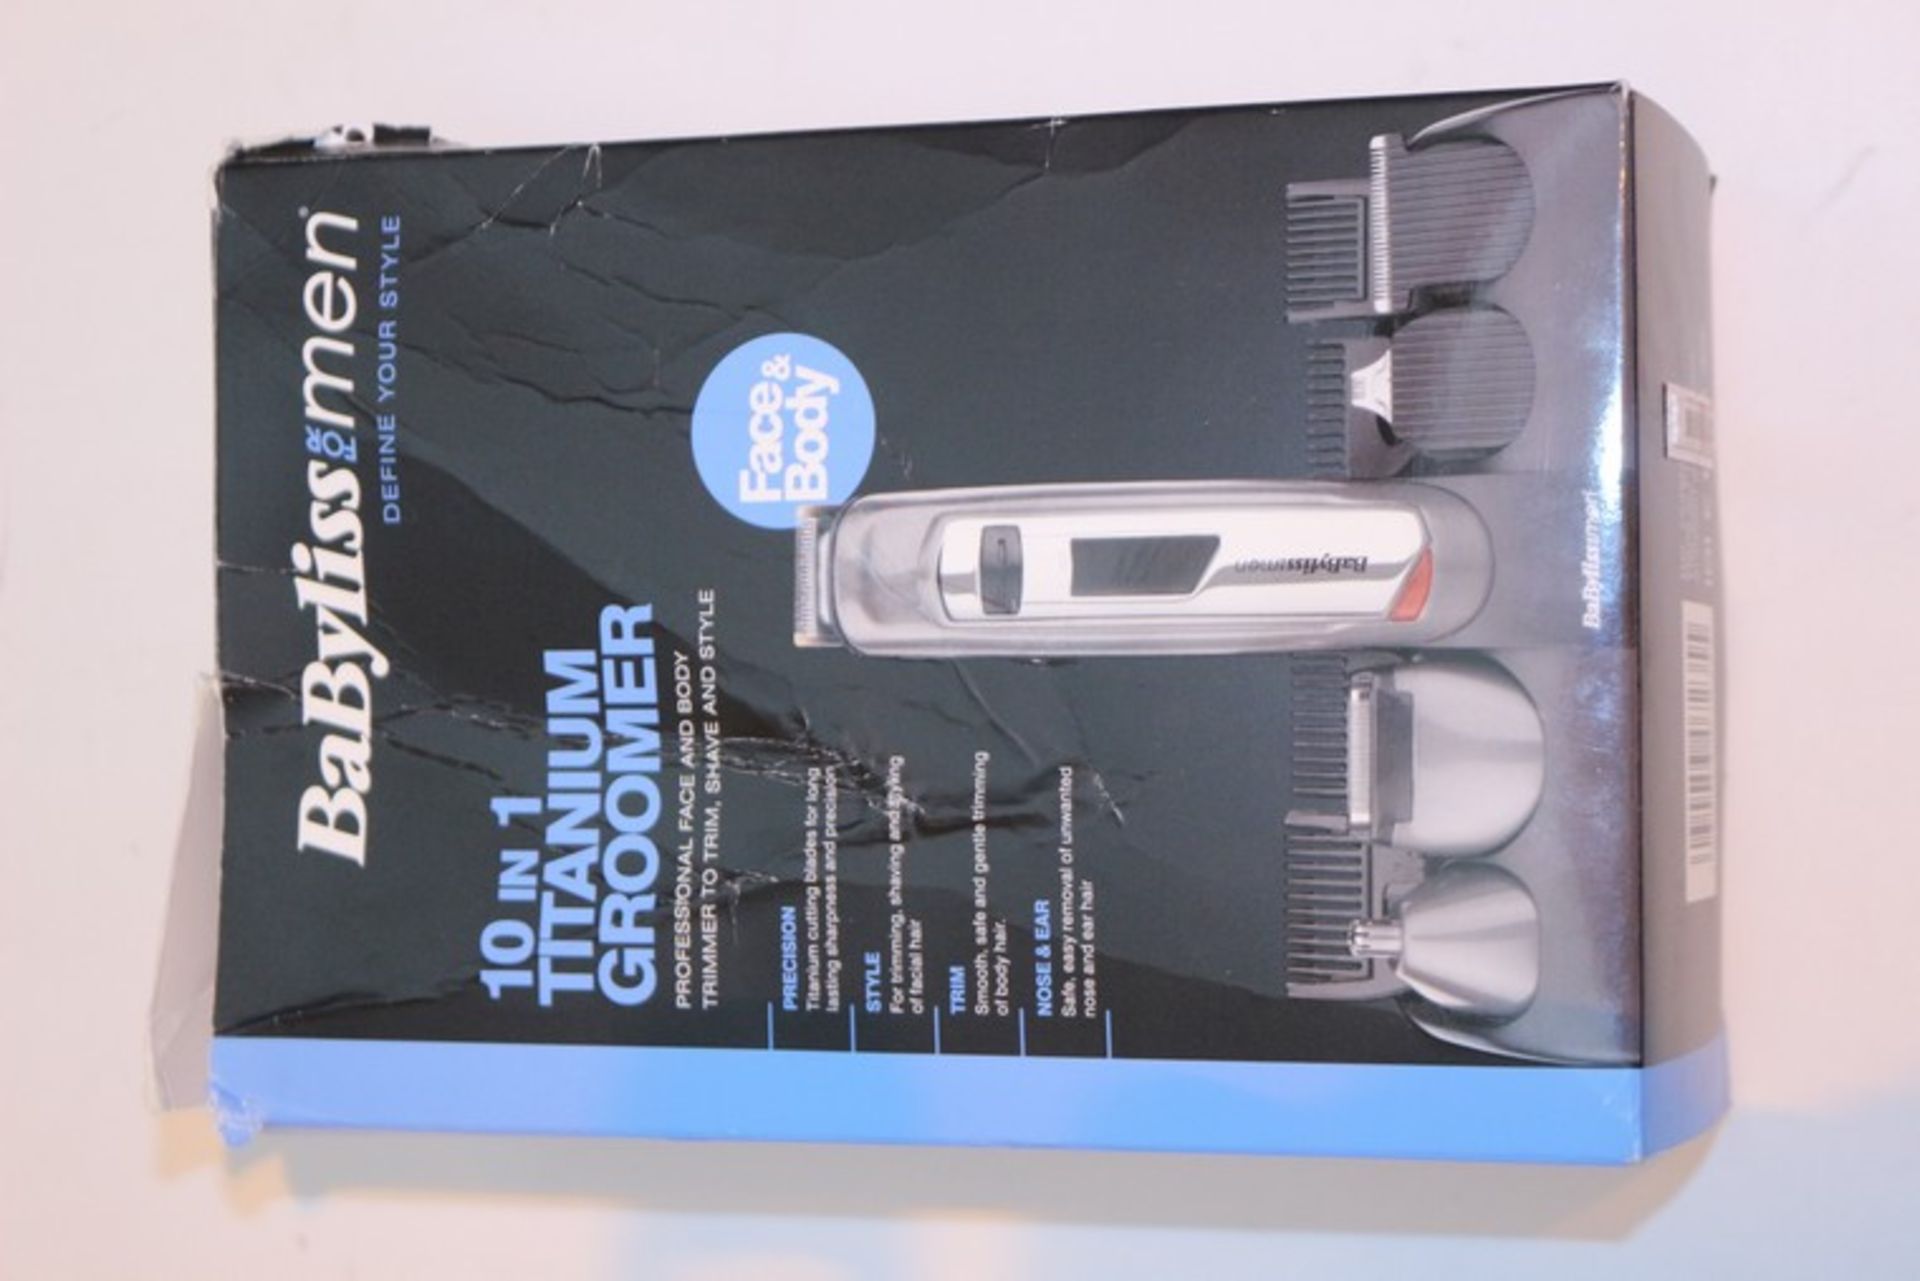 4 x ASSORTED ITEMS TO INCLUDE REMINGTON BEARD TRIMMERS BABYLISS HAIR BRUSHES 10 IN 1 TITANIUM